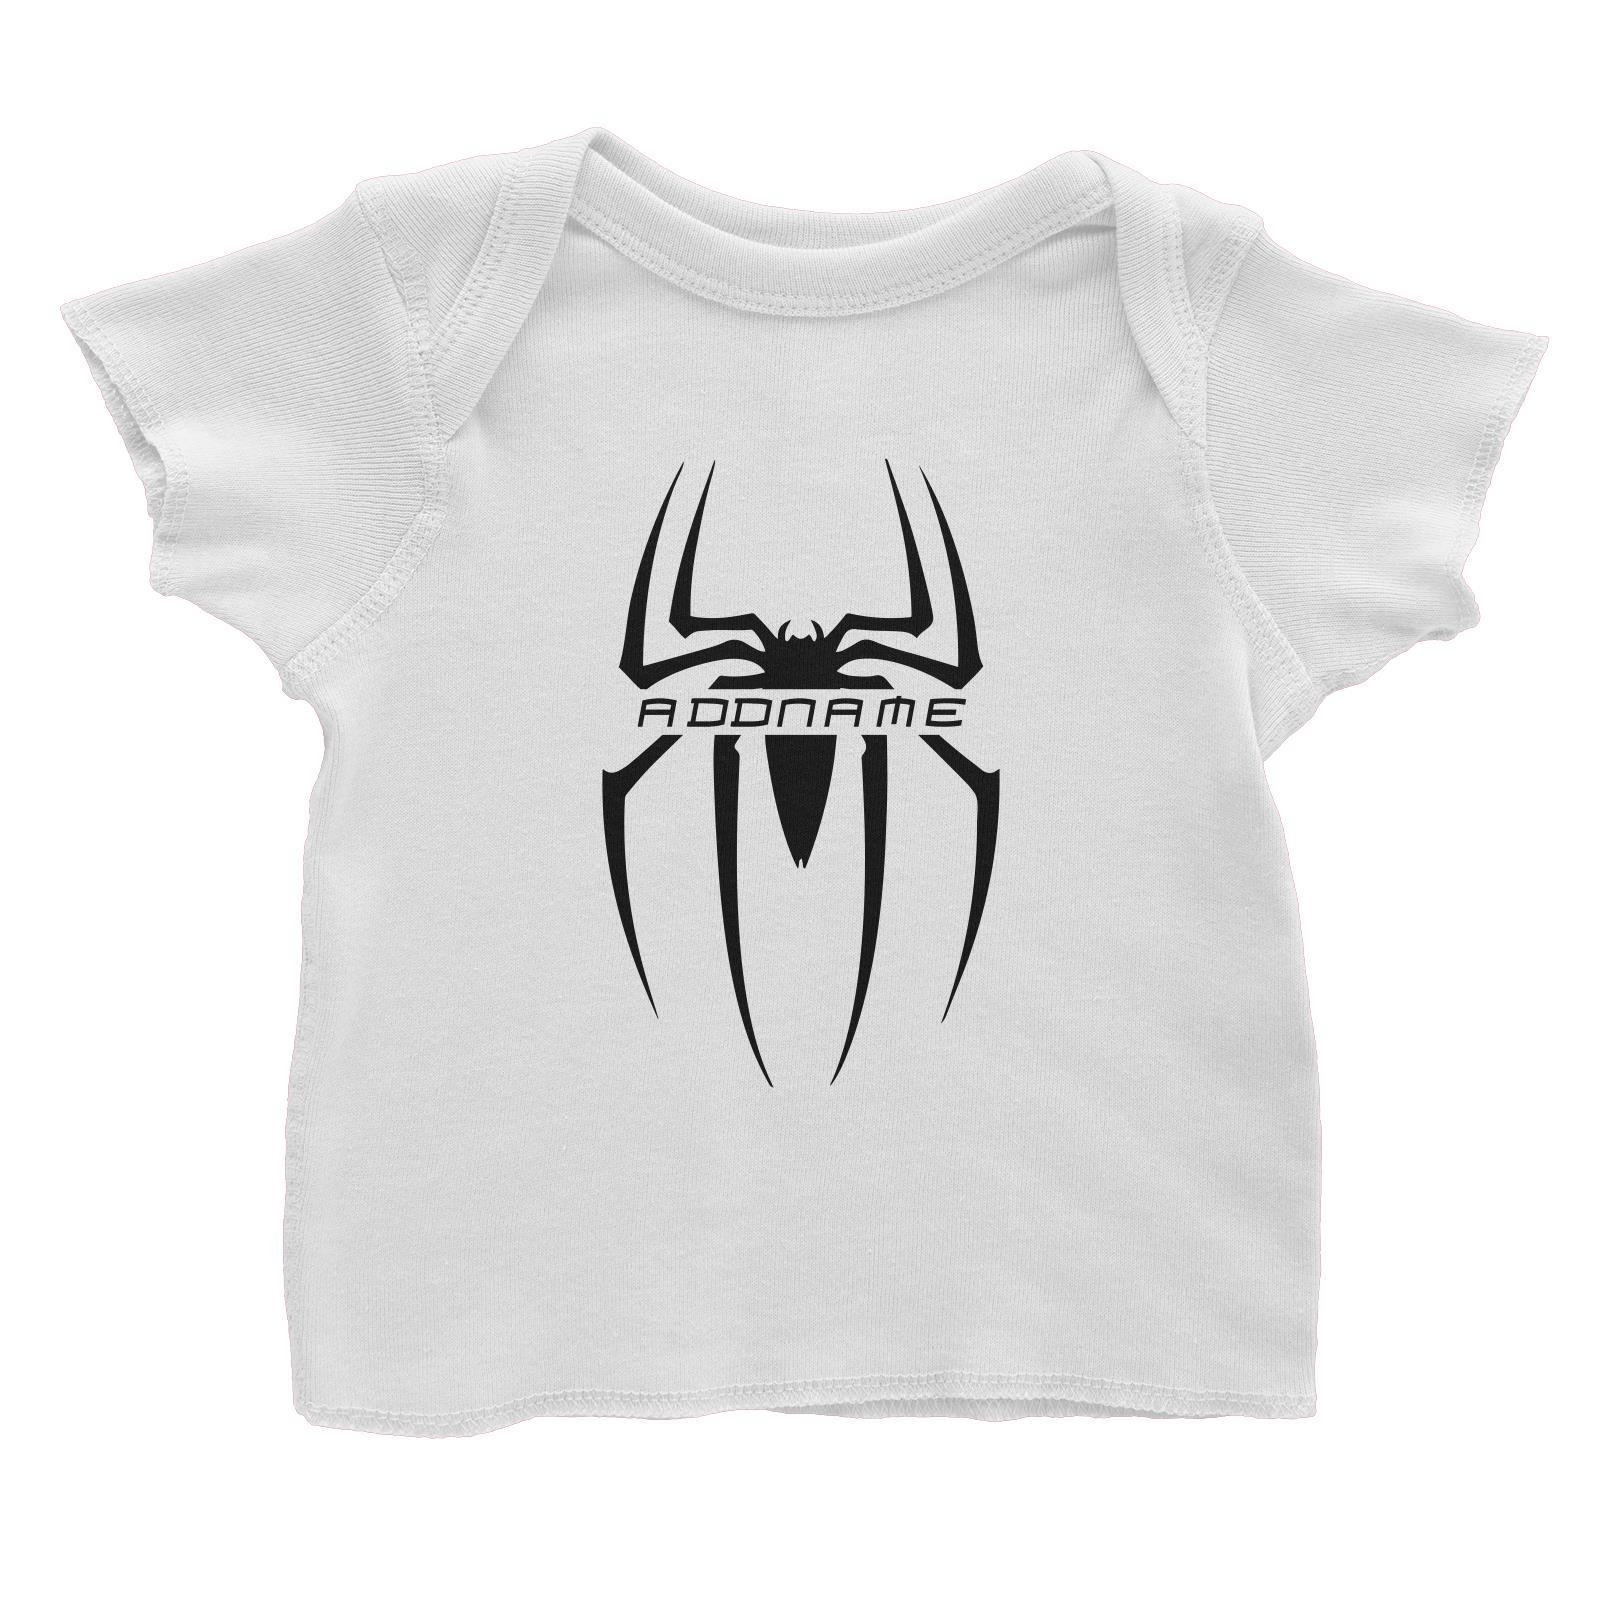 Superhero Spiderman Addname Baby T-Shirt  Matching Family Personalizable Designs